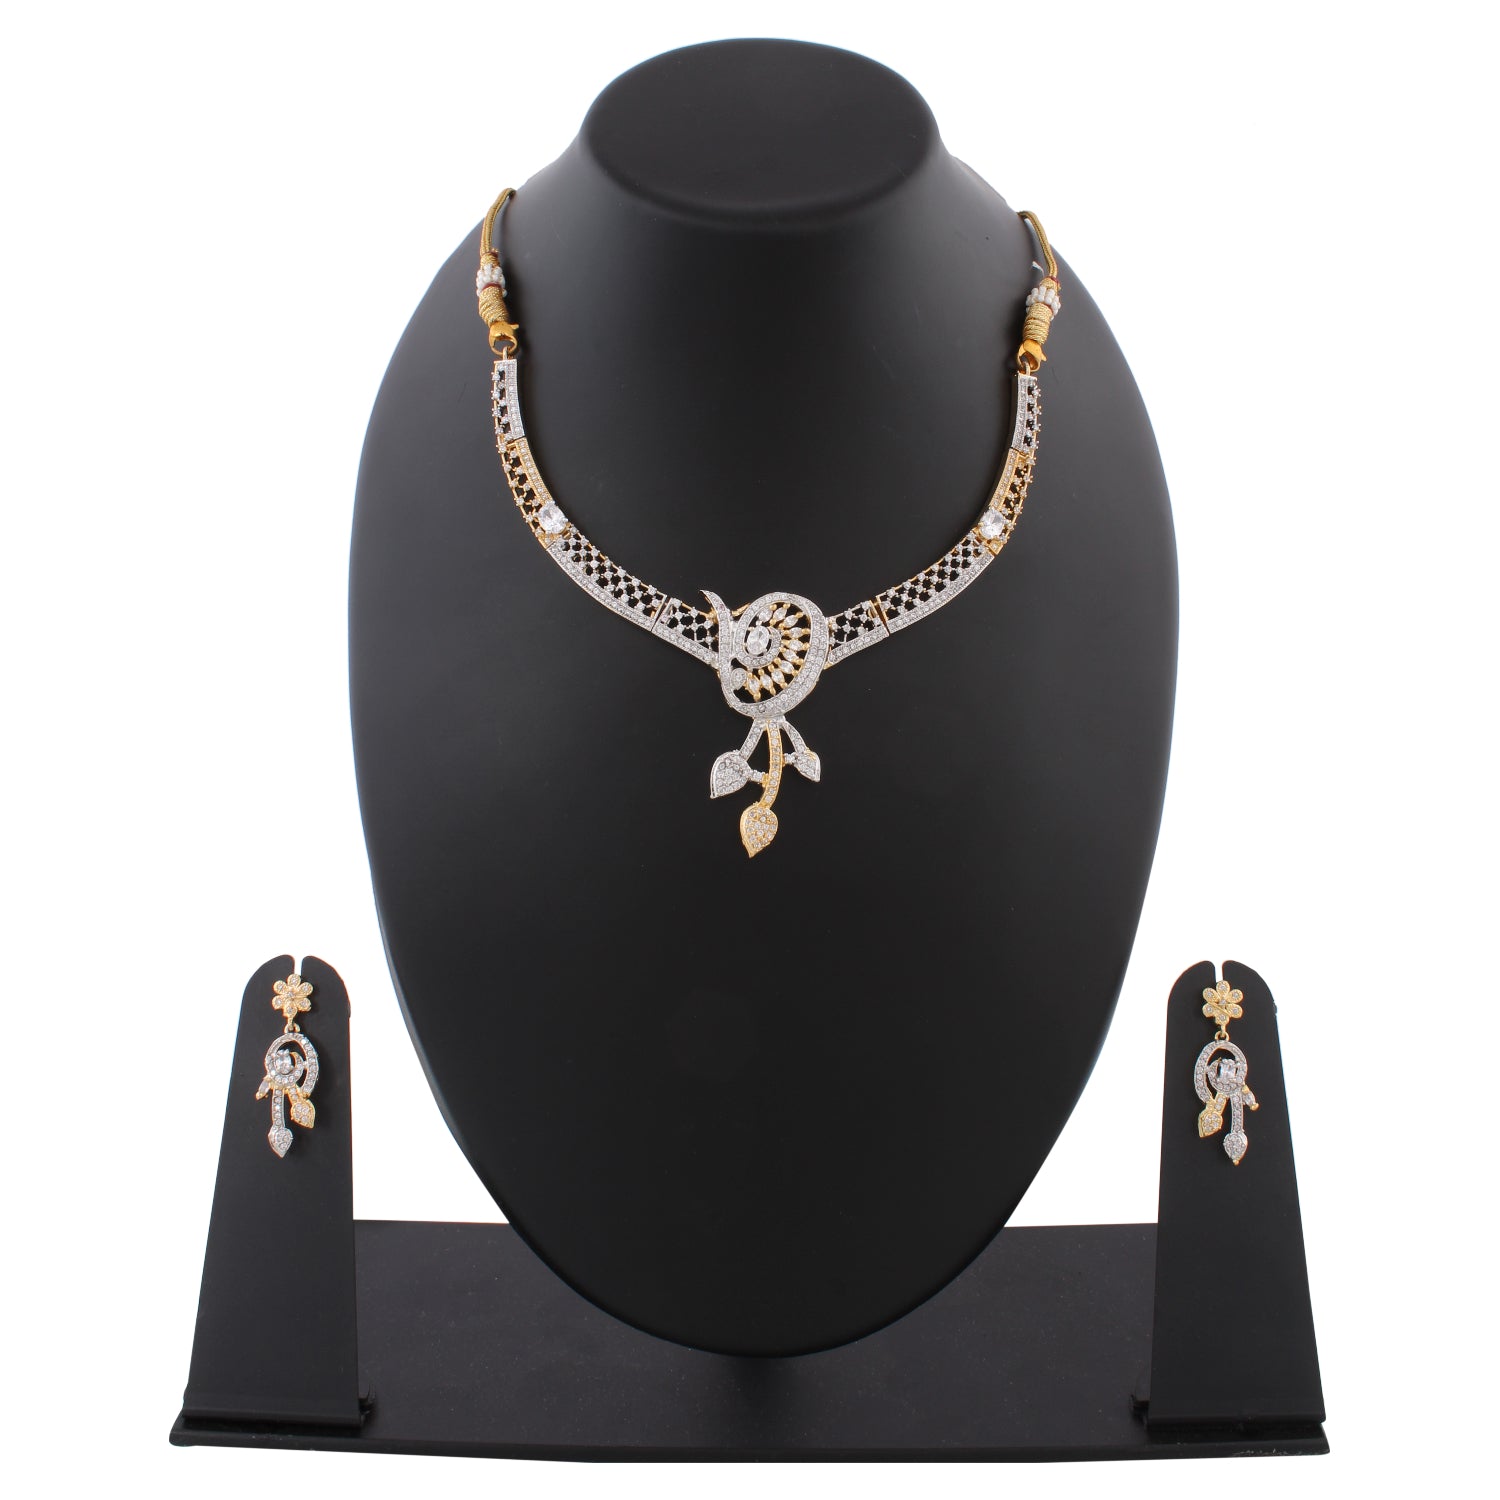 Indian Jewellery from Meira Jewellery:Necklace,FILGREE DESIGN AMERICAN DIAMOND CHOKER NECKLACE SET WITH MATCHING EARRING FOR WOMEN